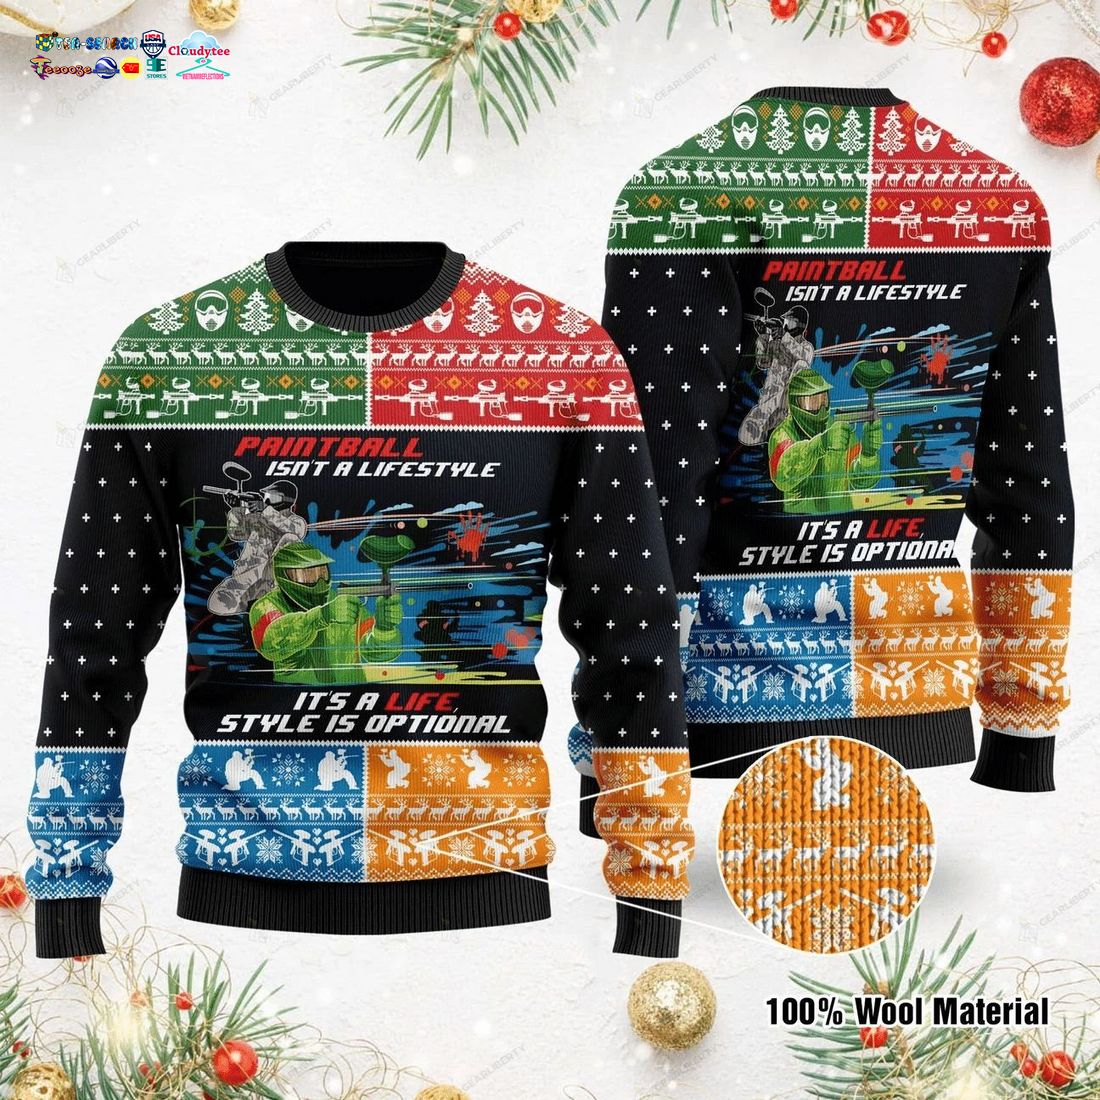 Paintball Isn't A Lifestyle It's A Life Style Is Optional Ugly Christmas Sweater